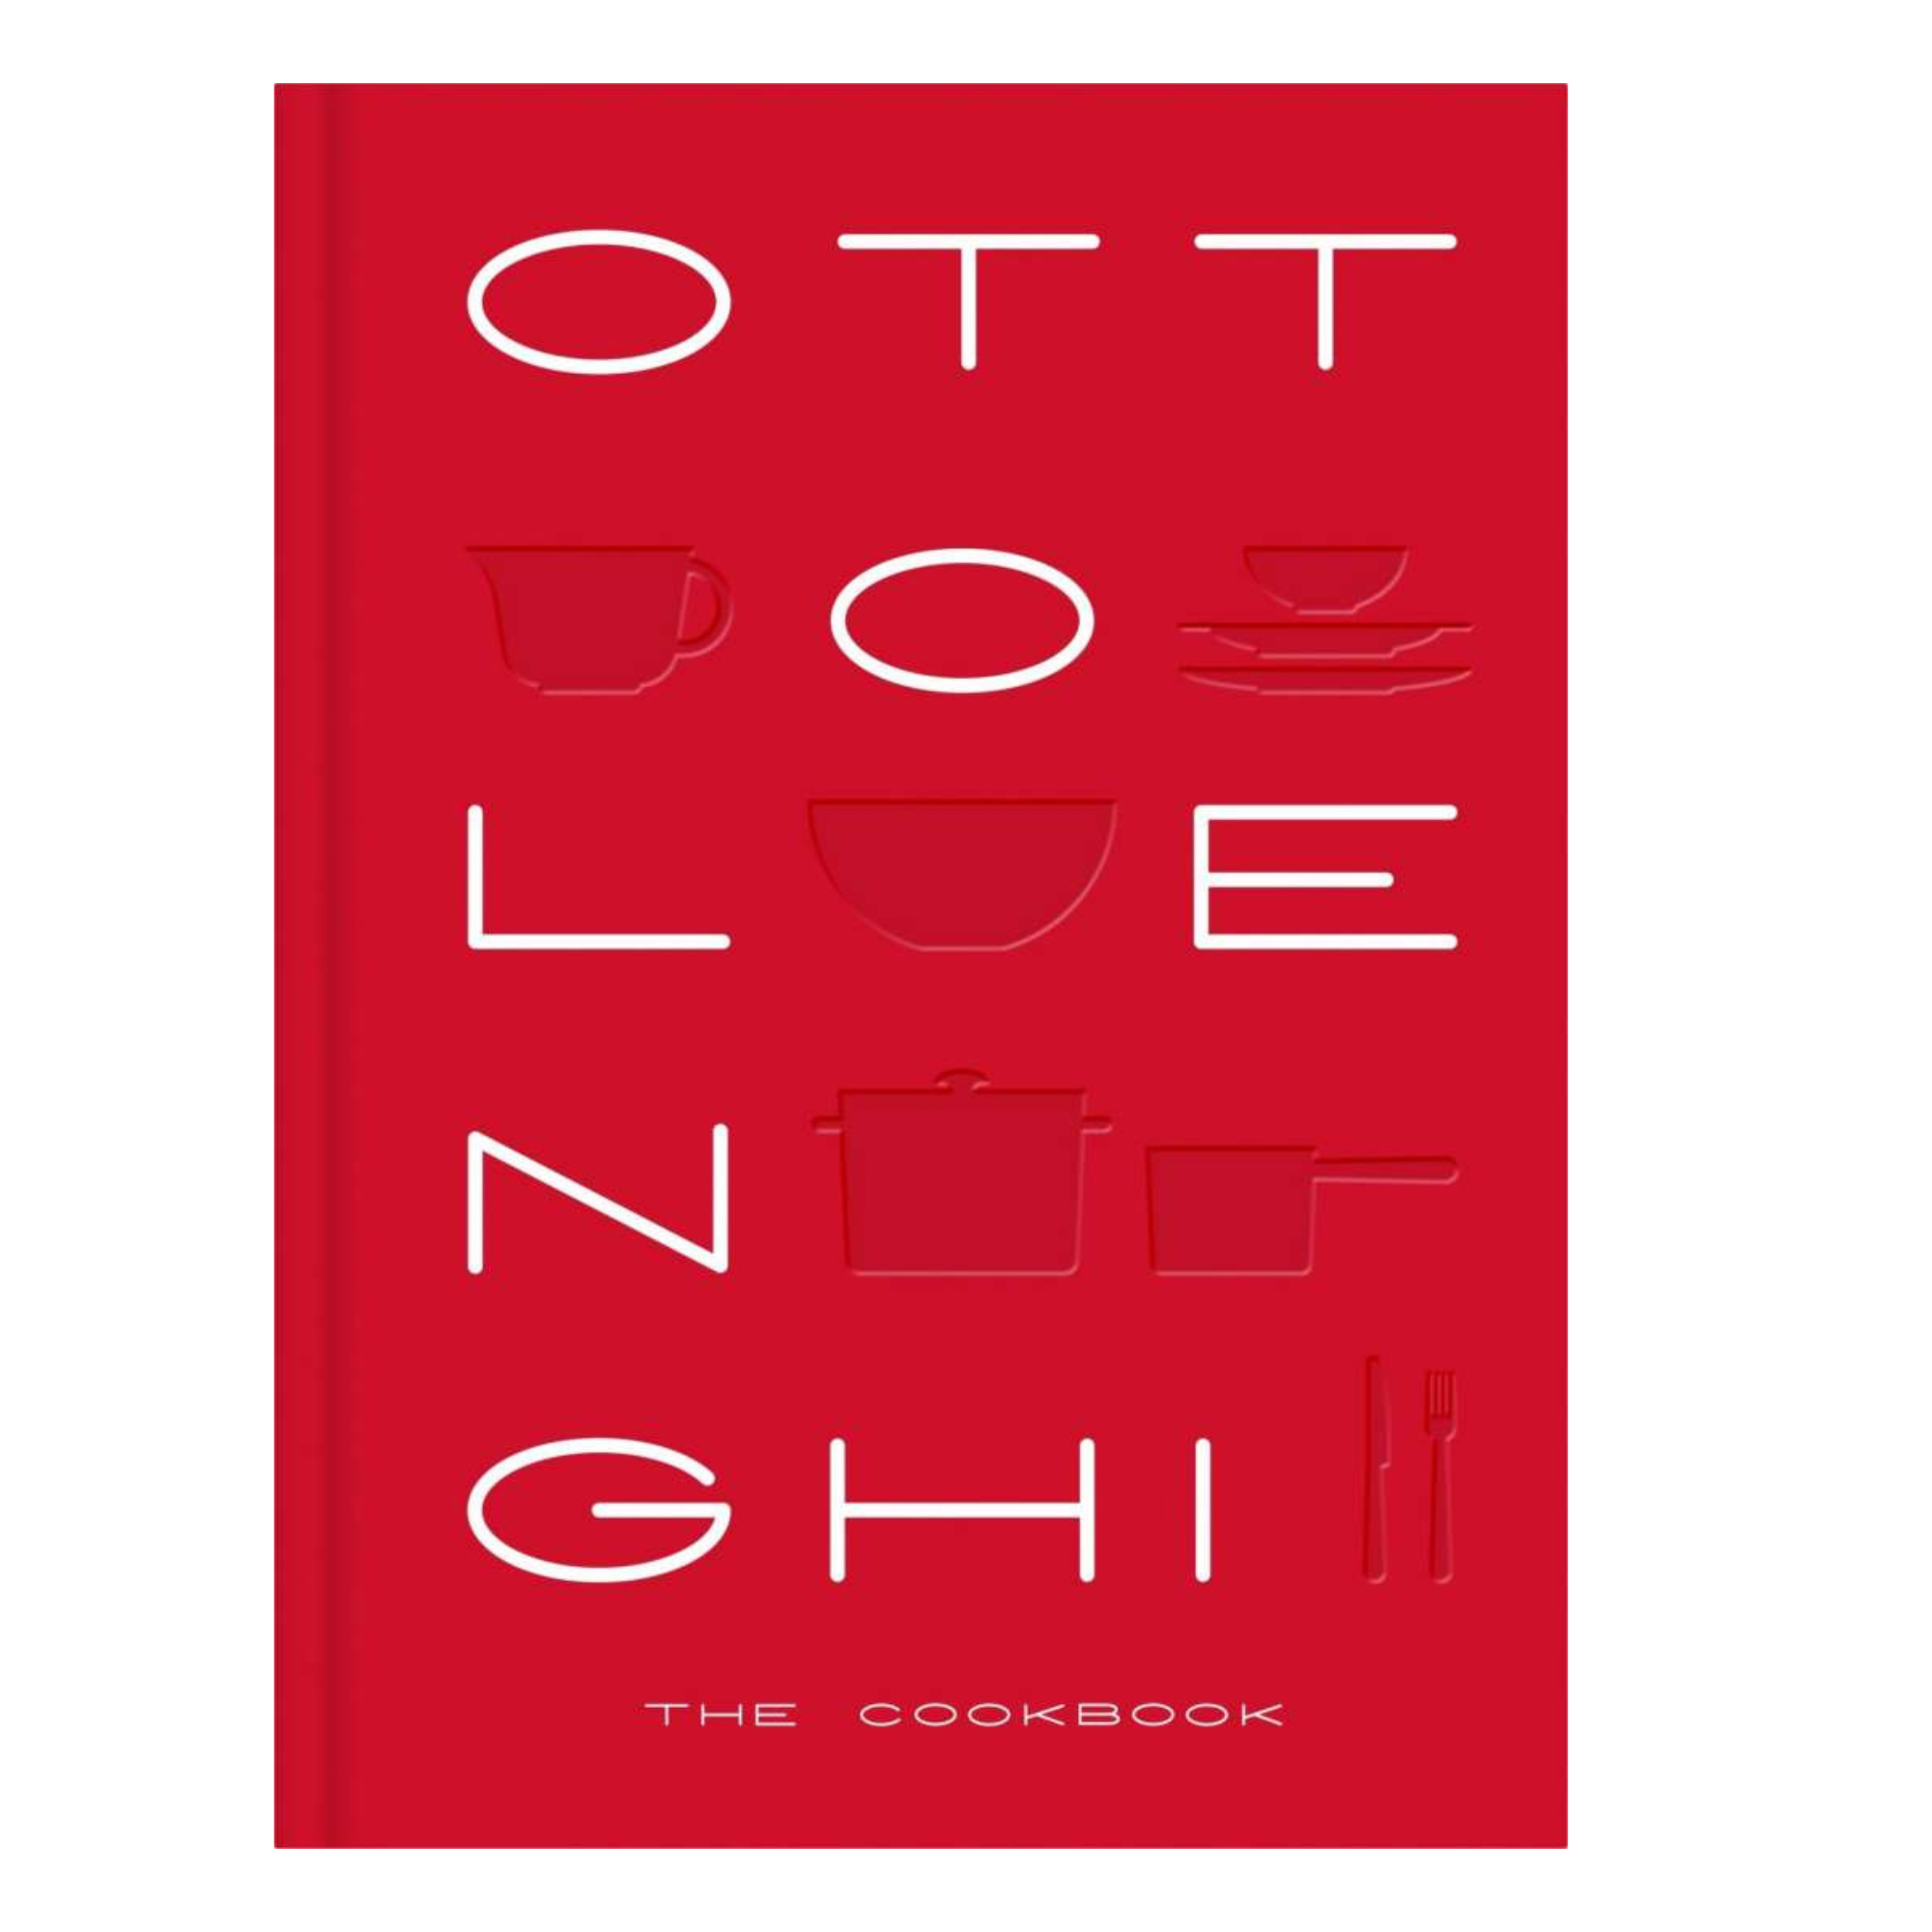 OTTOLENGHI: THE COOKBOOK (NEW ED)